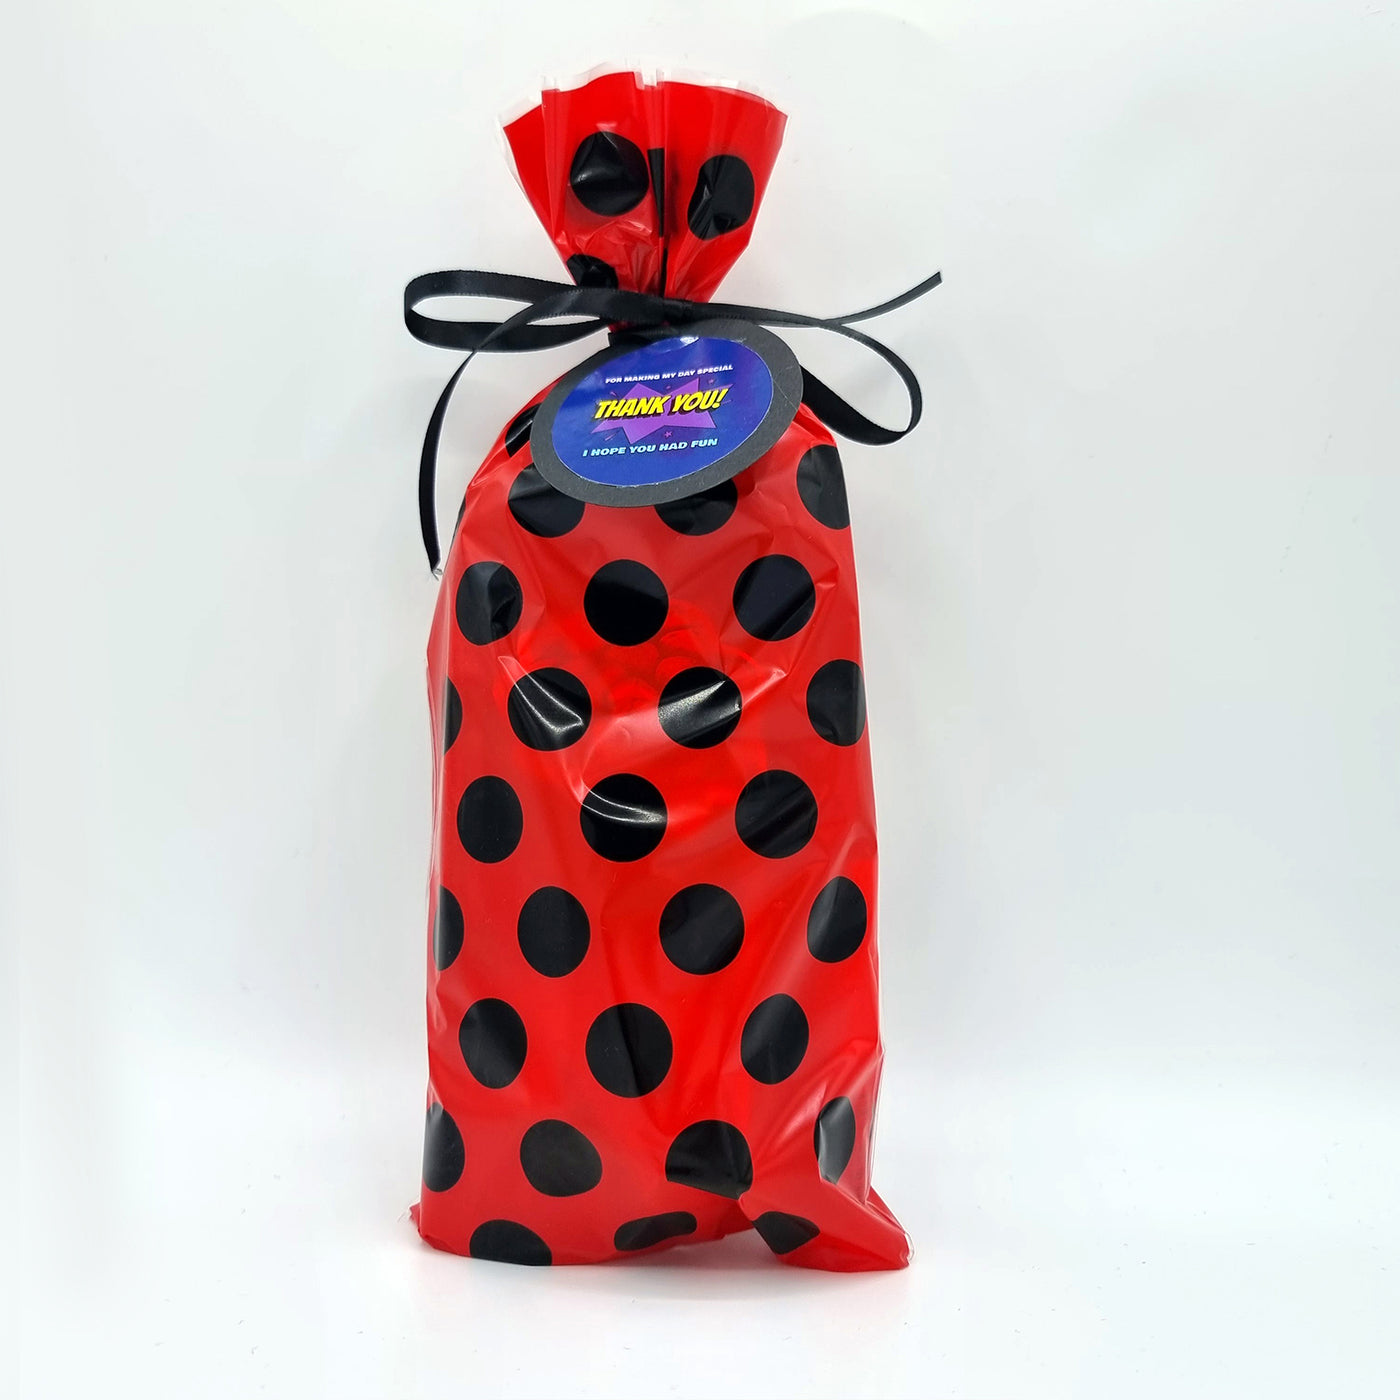 Pre Filled Red Polka Dot Ladybug Hero Birthday Party Bags With Toys And Sweets, Party Favours.